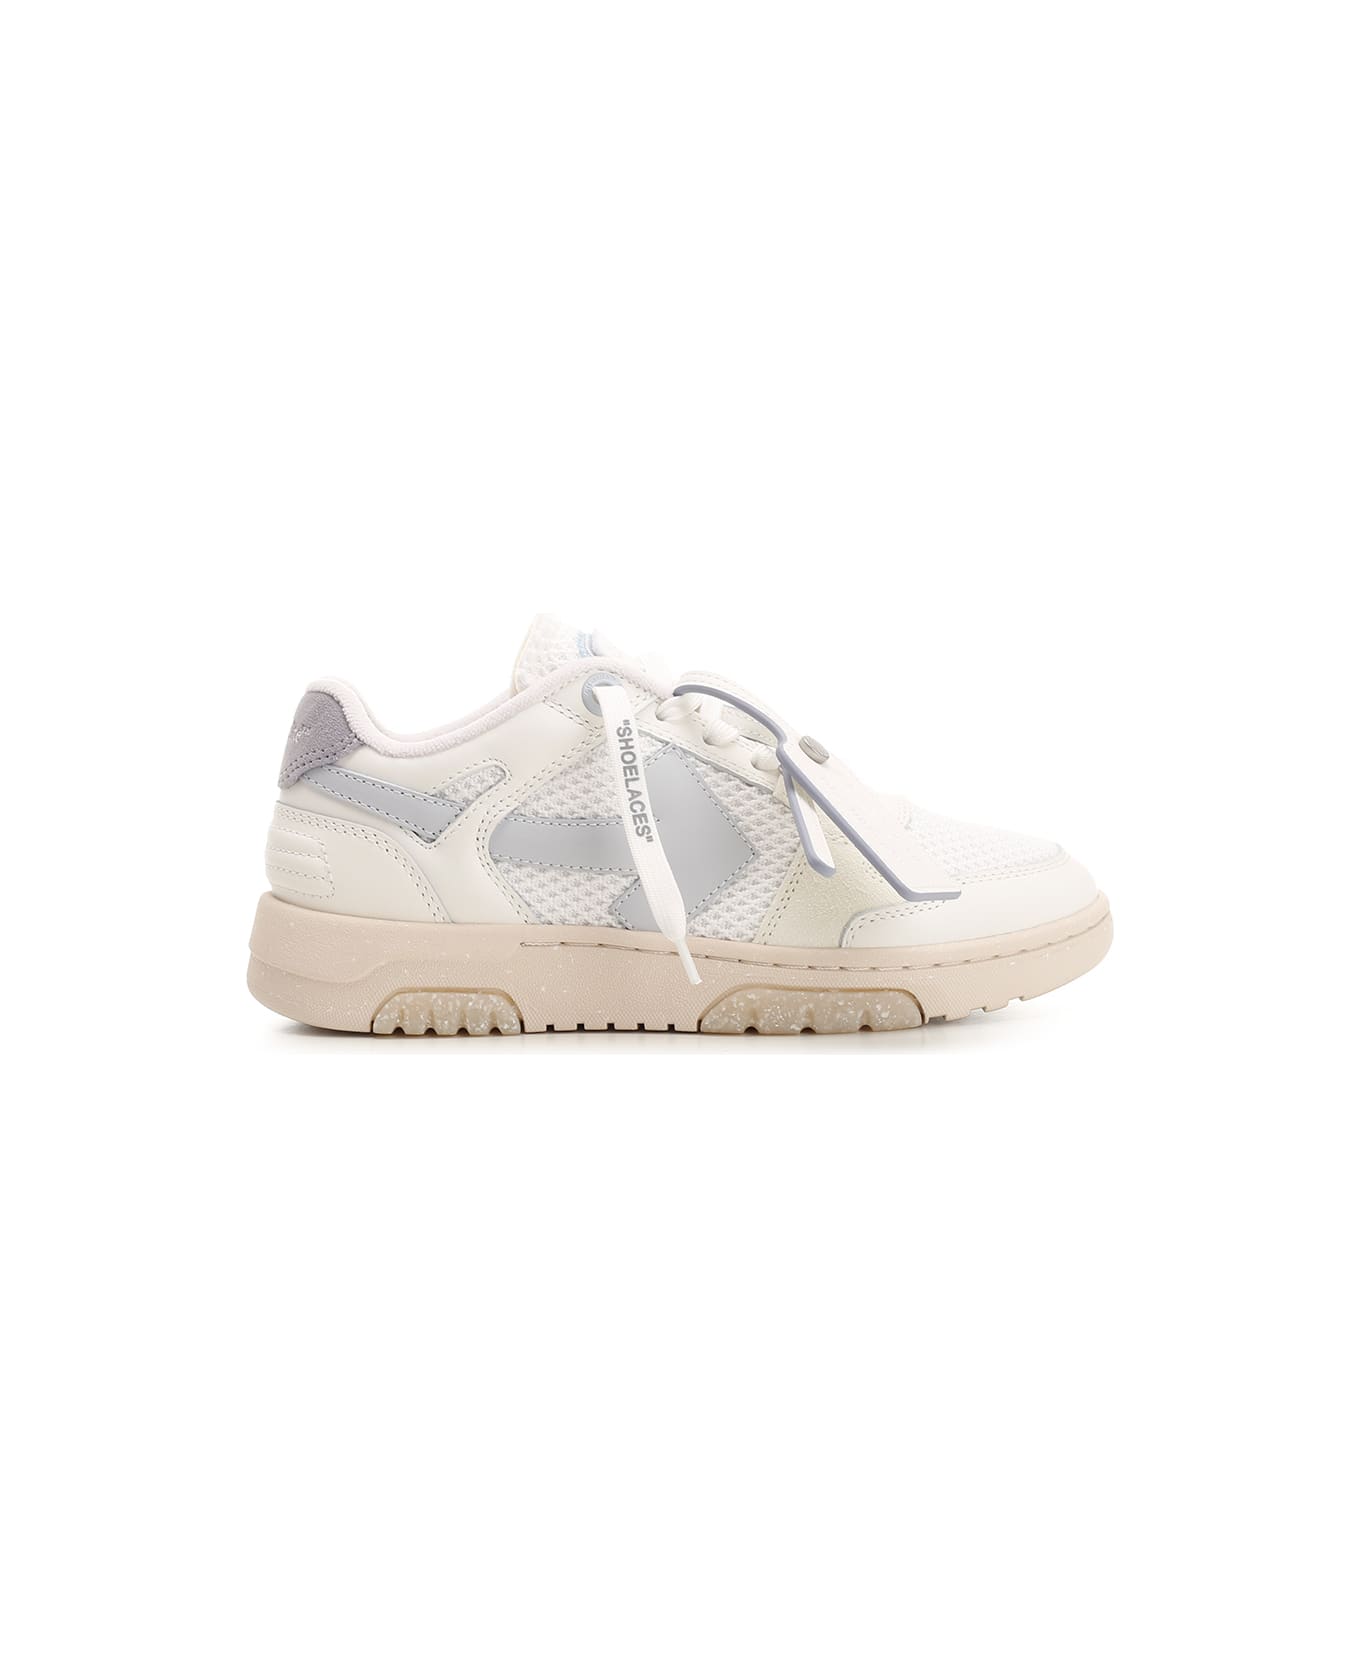 Off-White 'out Of Office' Slim Sneakers - White